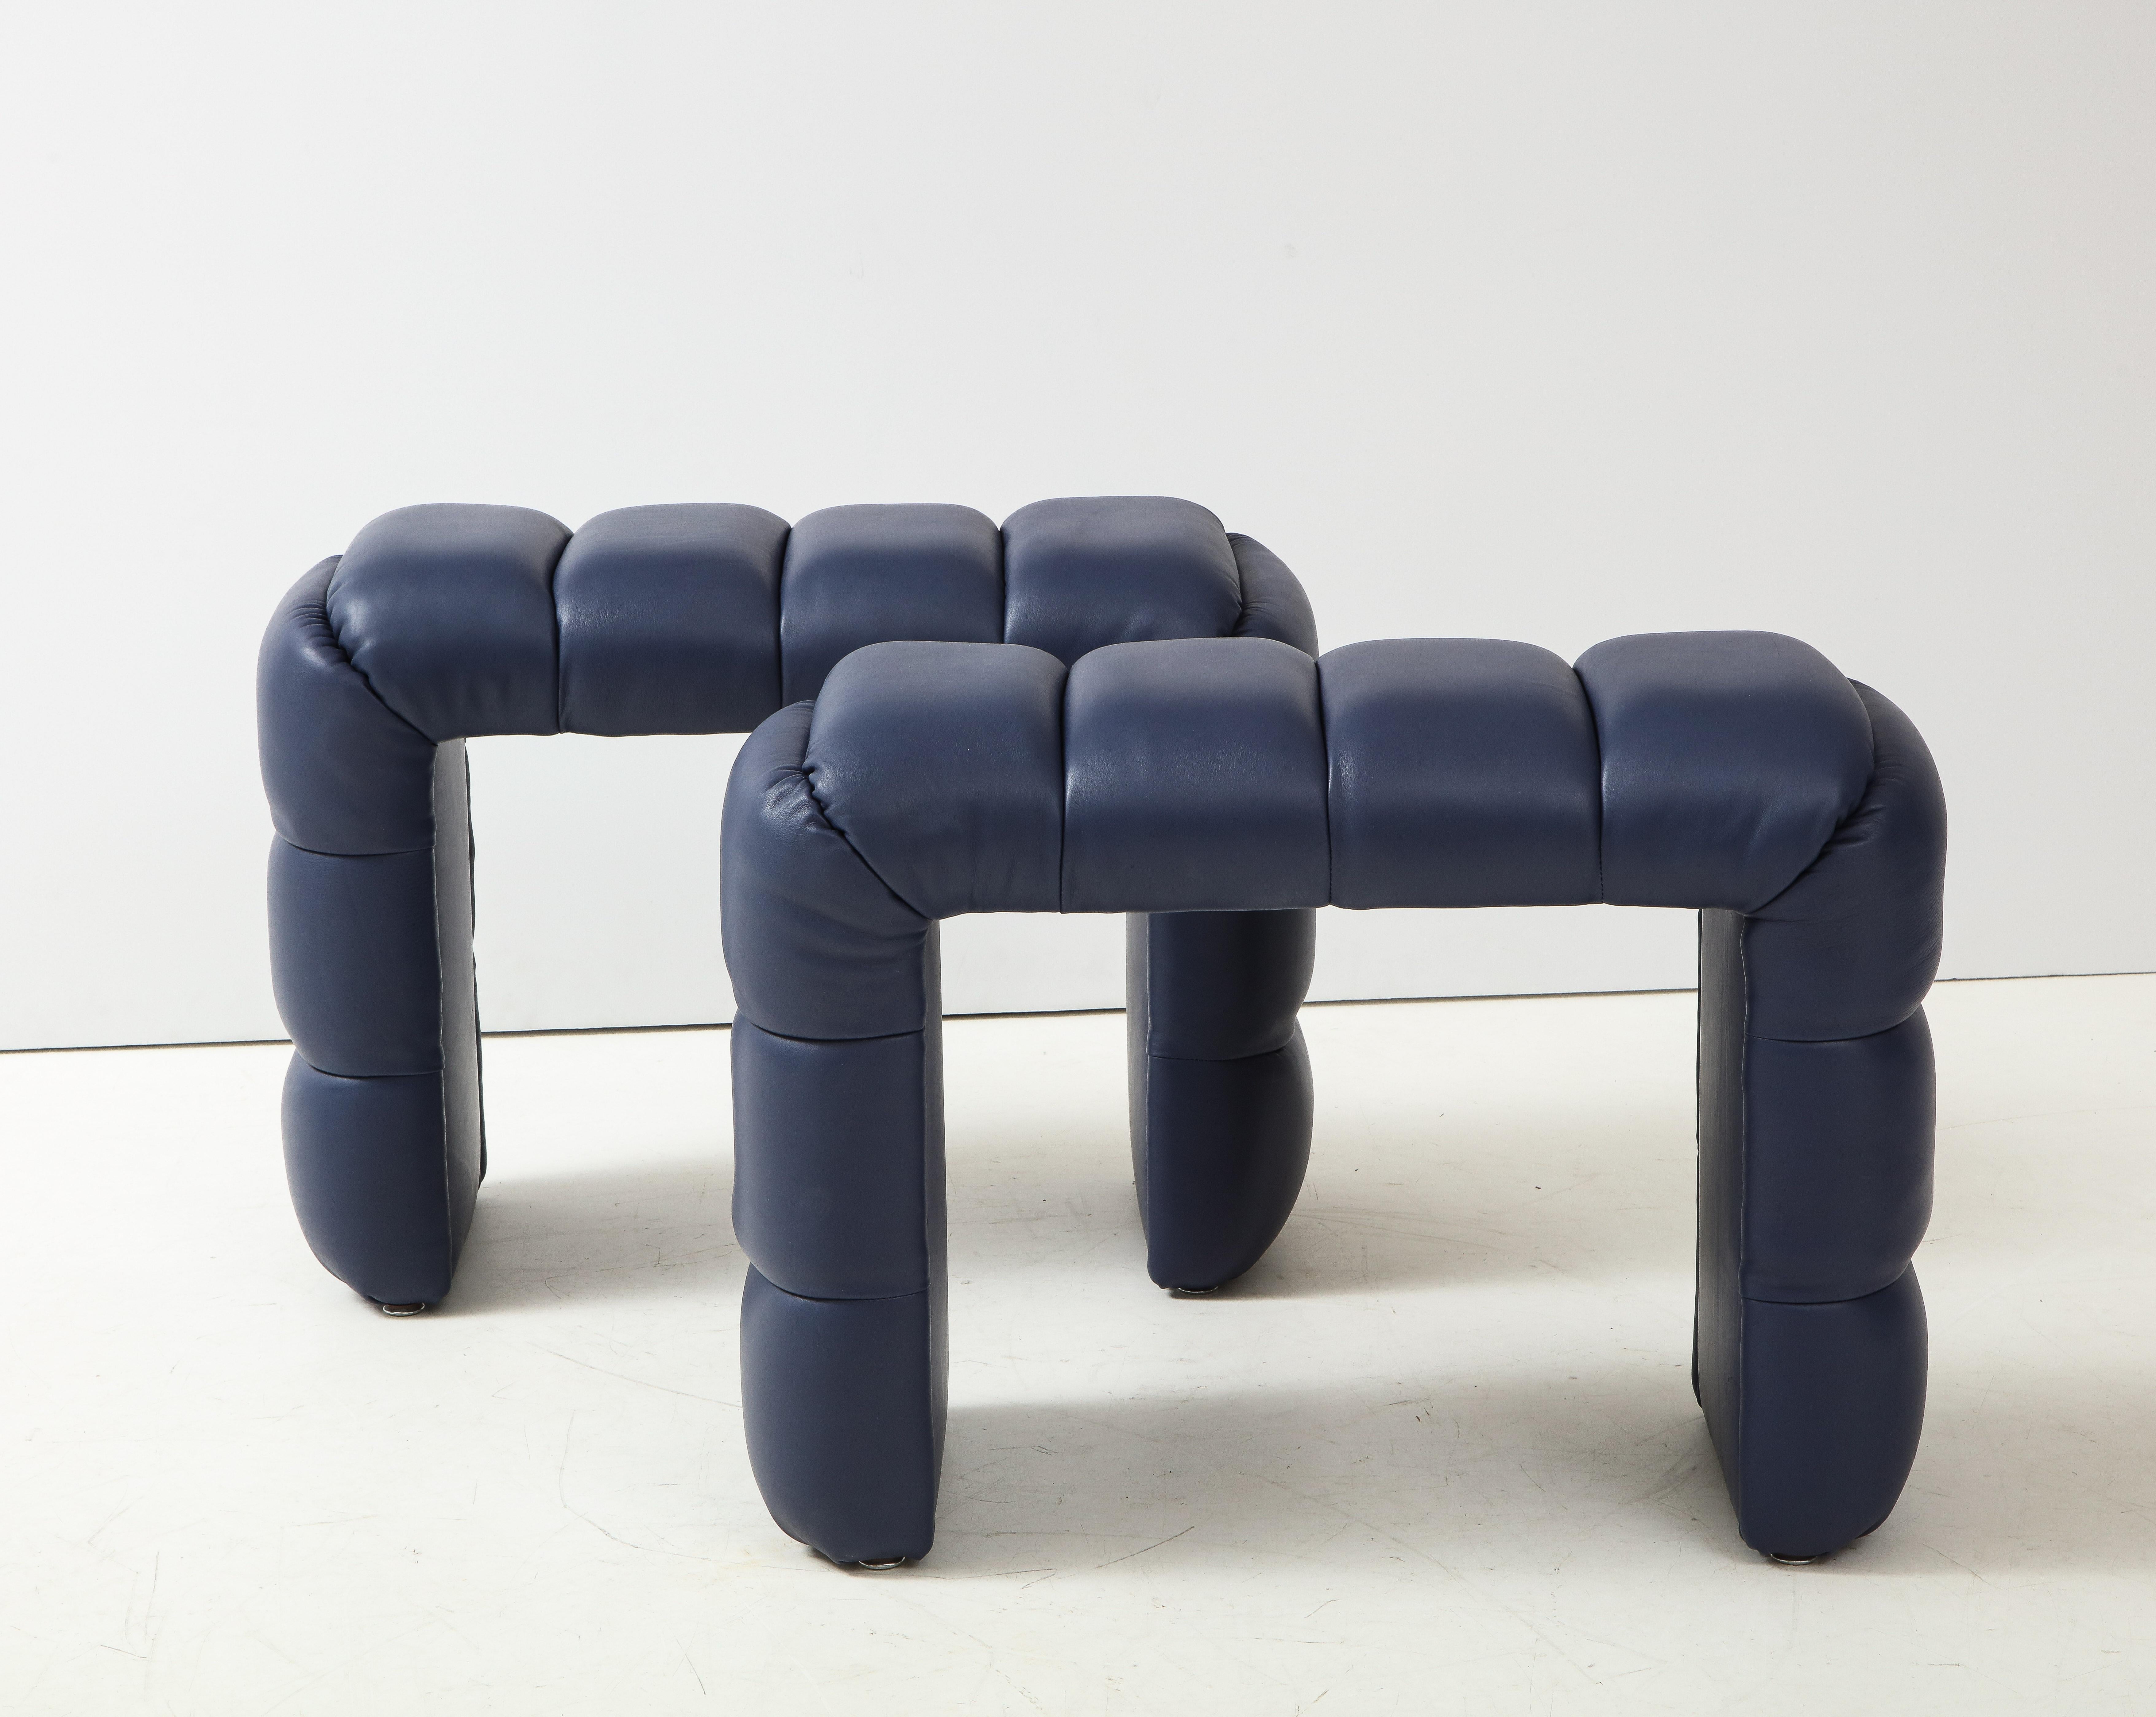 Single Custom Channel Tufted Blue Soft Leather Stool or Bench, Italy, 2021 For Sale 1